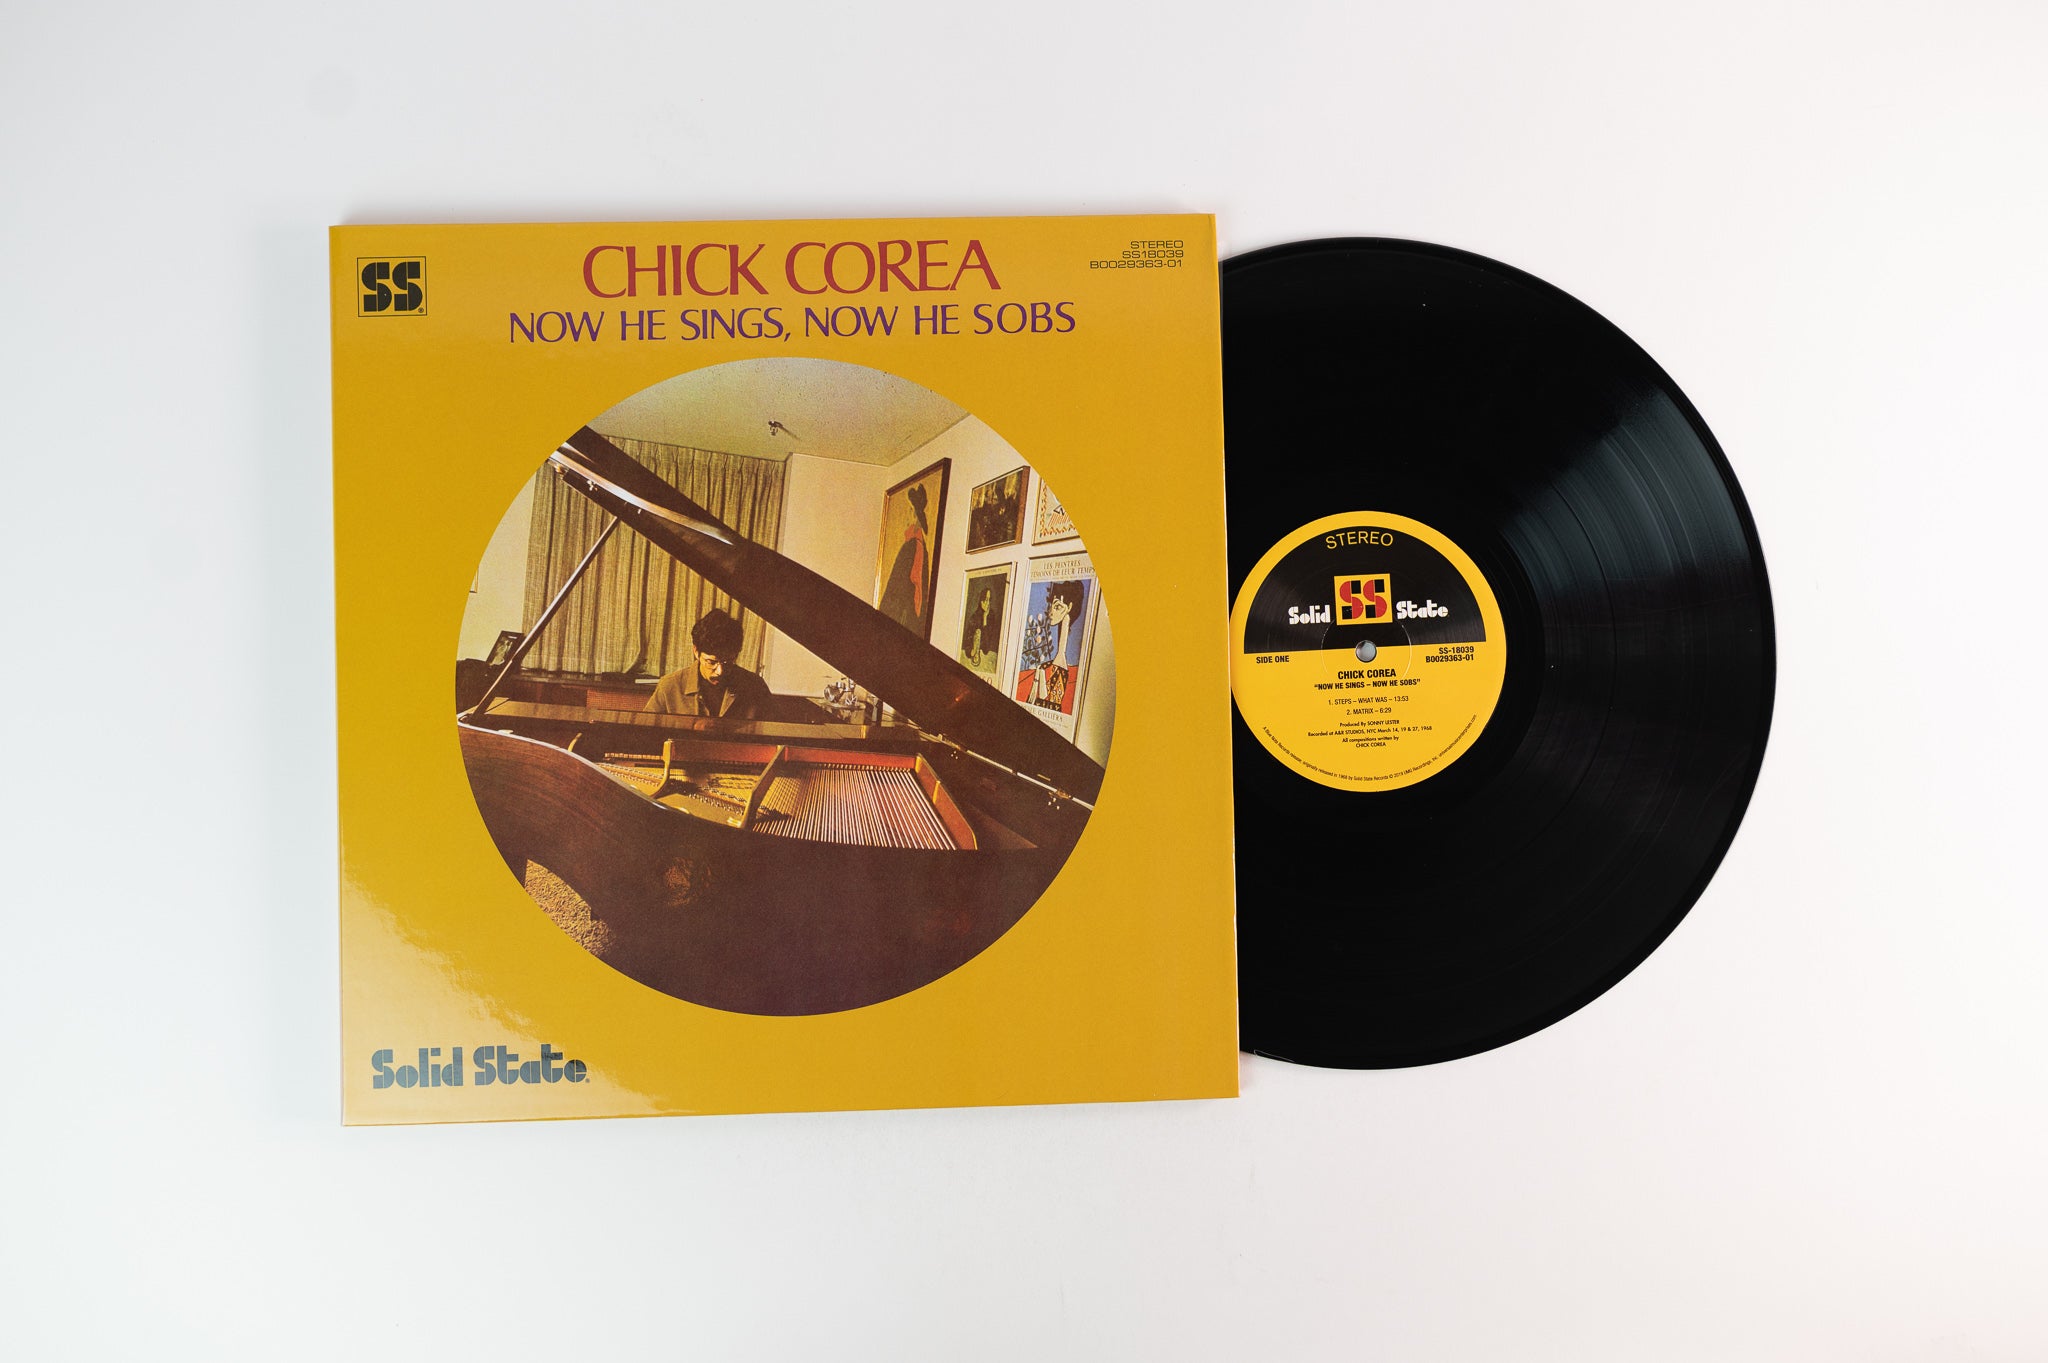 Chick Corea - Now He Sings, Now He Sobs on Solid State / Blue Note Tone Poet Series Reissue